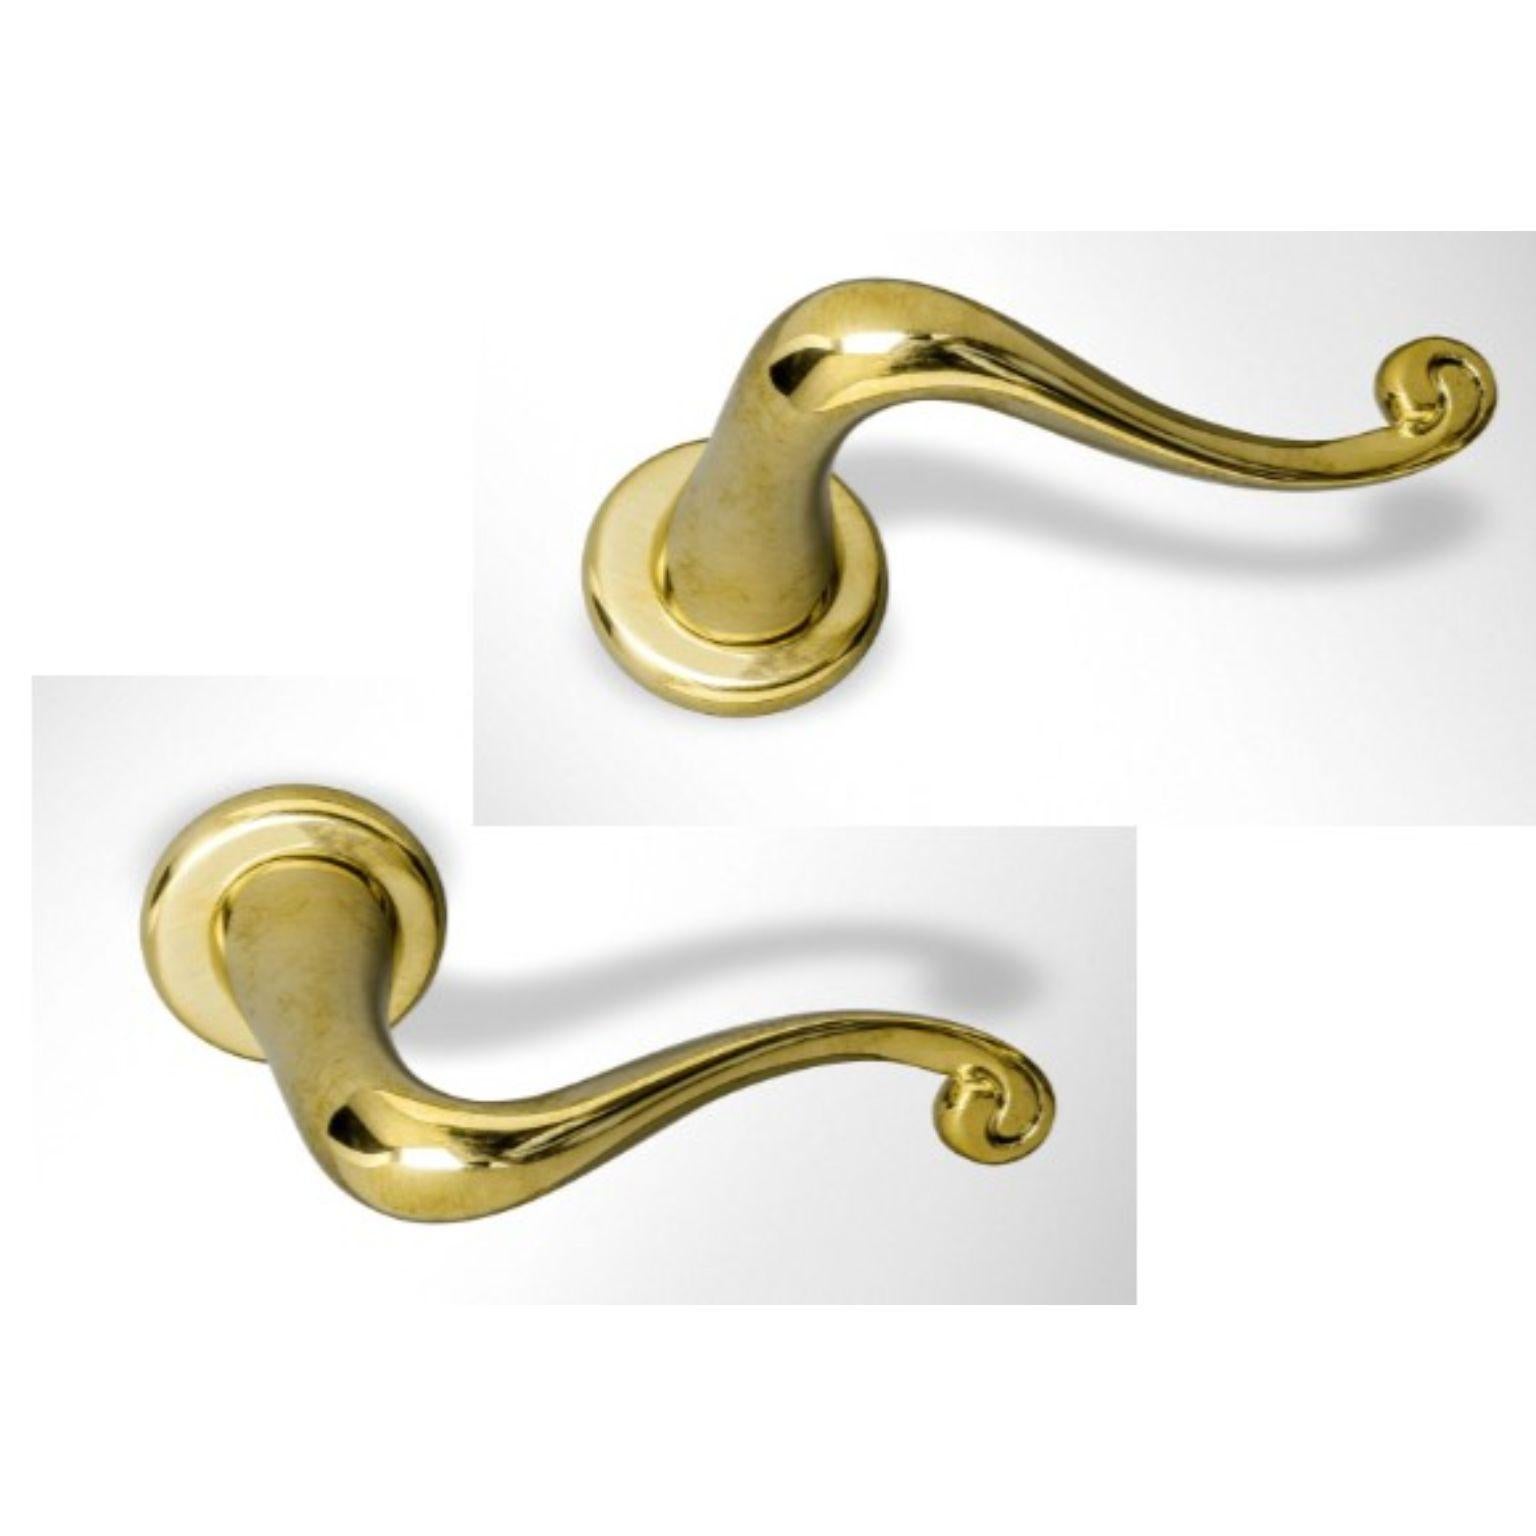 Set of 2 Batlló door handle by Antoni Gaudí.
Dimensions: D5 x H10cm 
Materials: brass

Before reissuing Gaudí’s furniture, BD, together with the architect David Ferrer, faithfully reproduced some of the metalwork pieces designed by Gaudí between